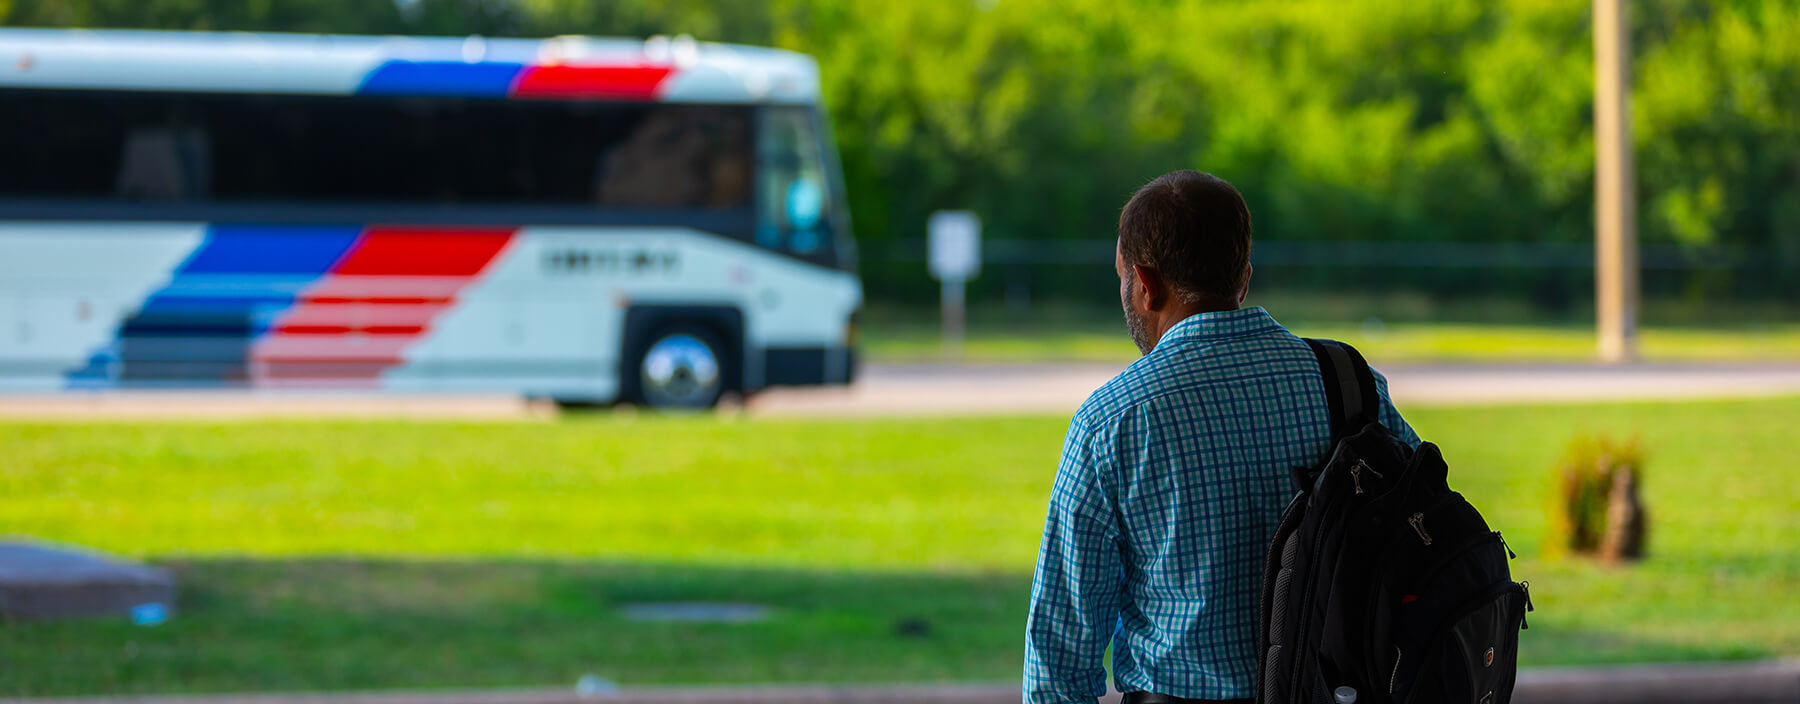 Customer waiting at a METRO facility prepares himself to board an arriving local bus